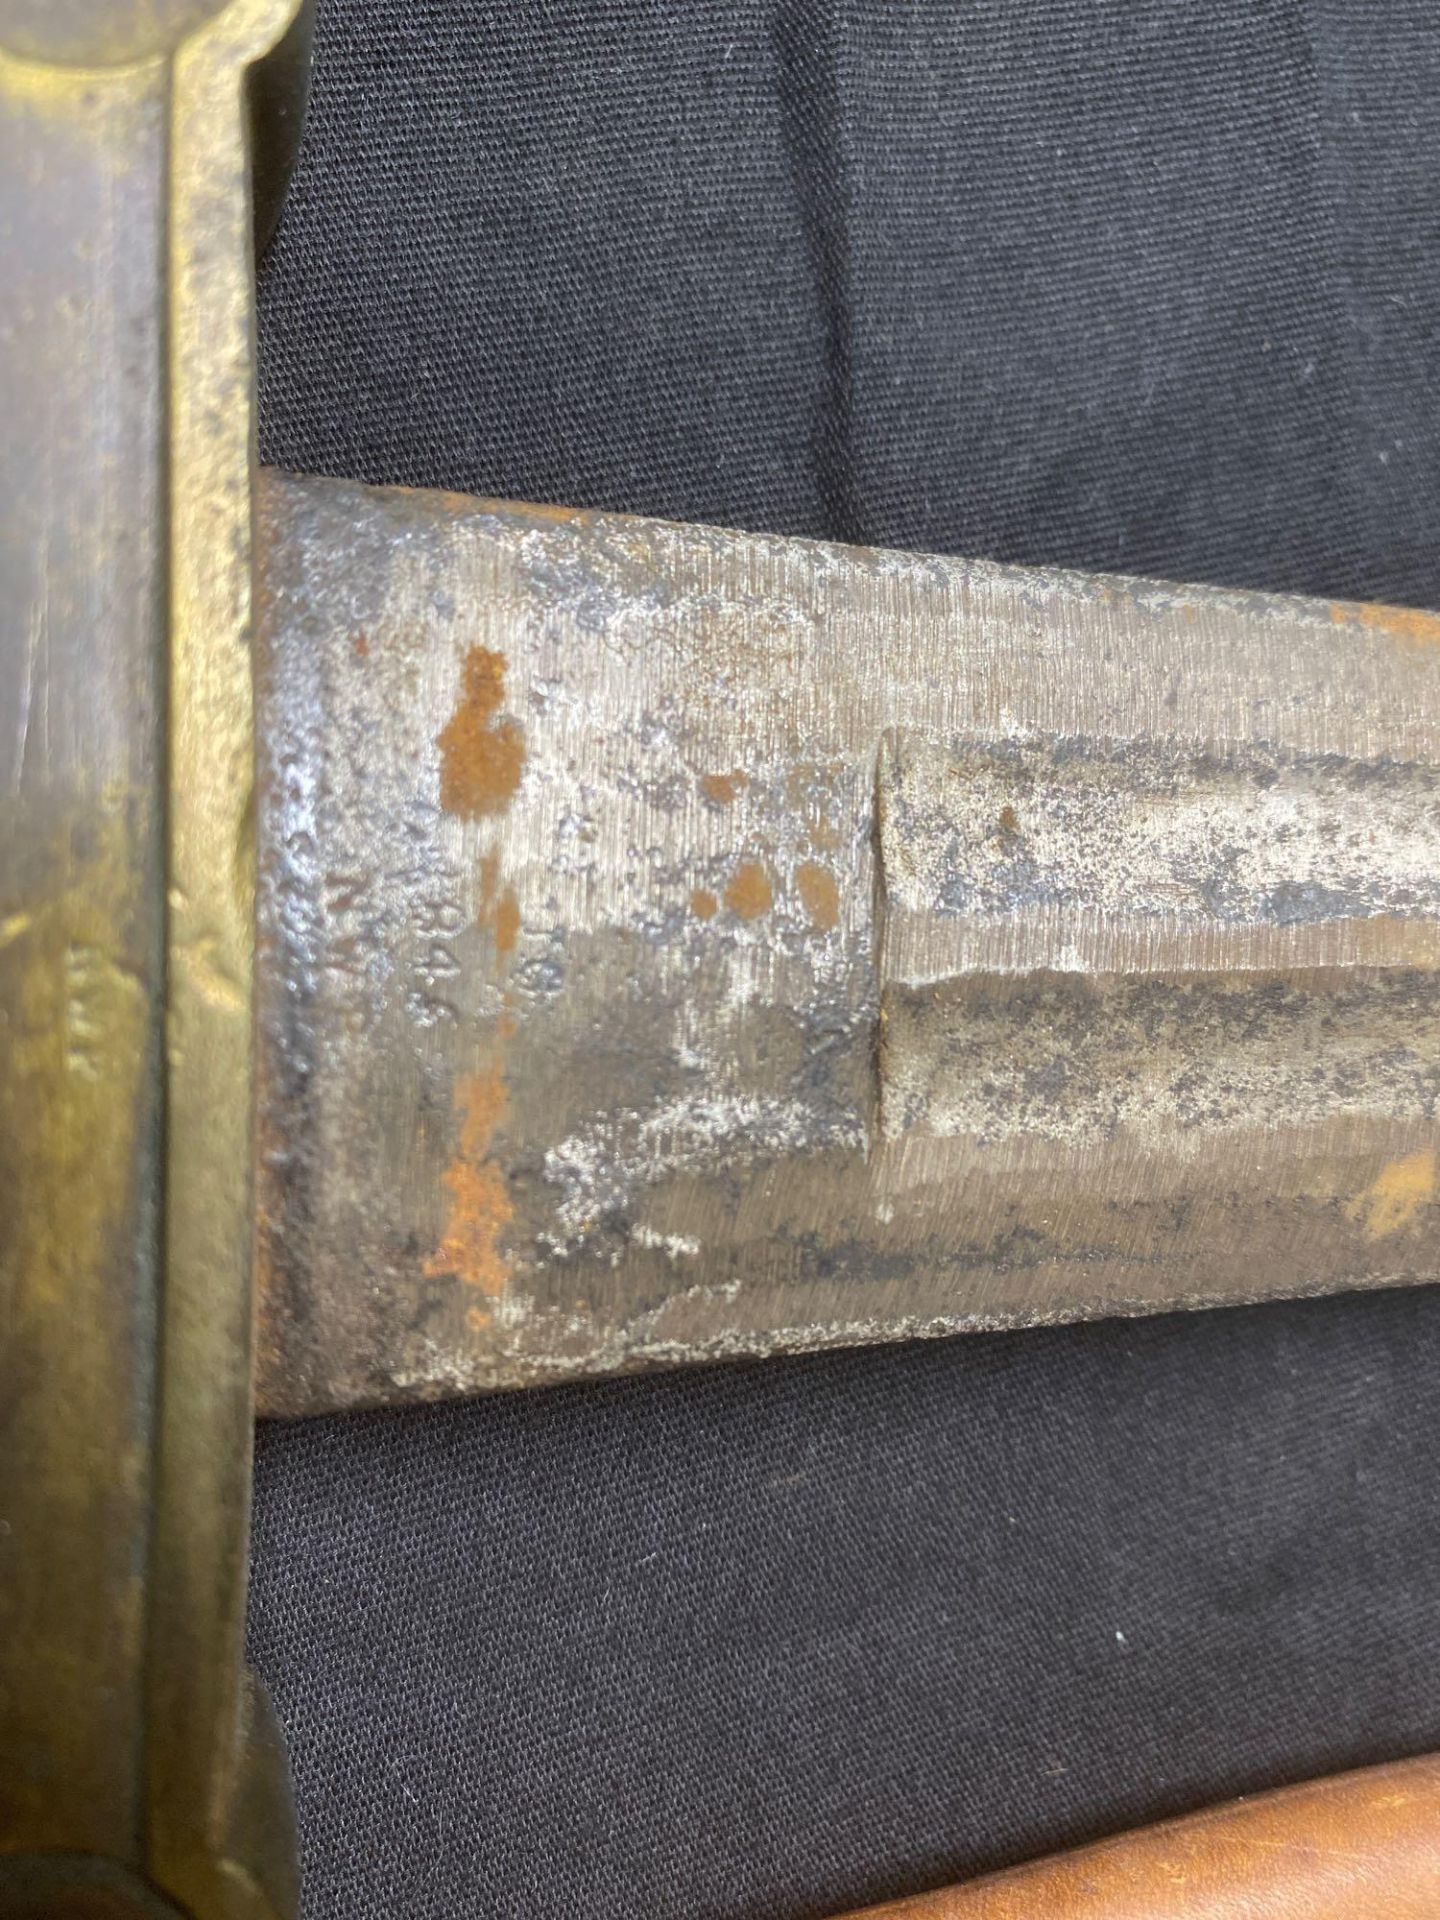 OLD HEAVY BRASS HANDLE SWORD MARKED US 1846 NWP, WITH MODERN HAND MADE SHEATH - Image 2 of 3